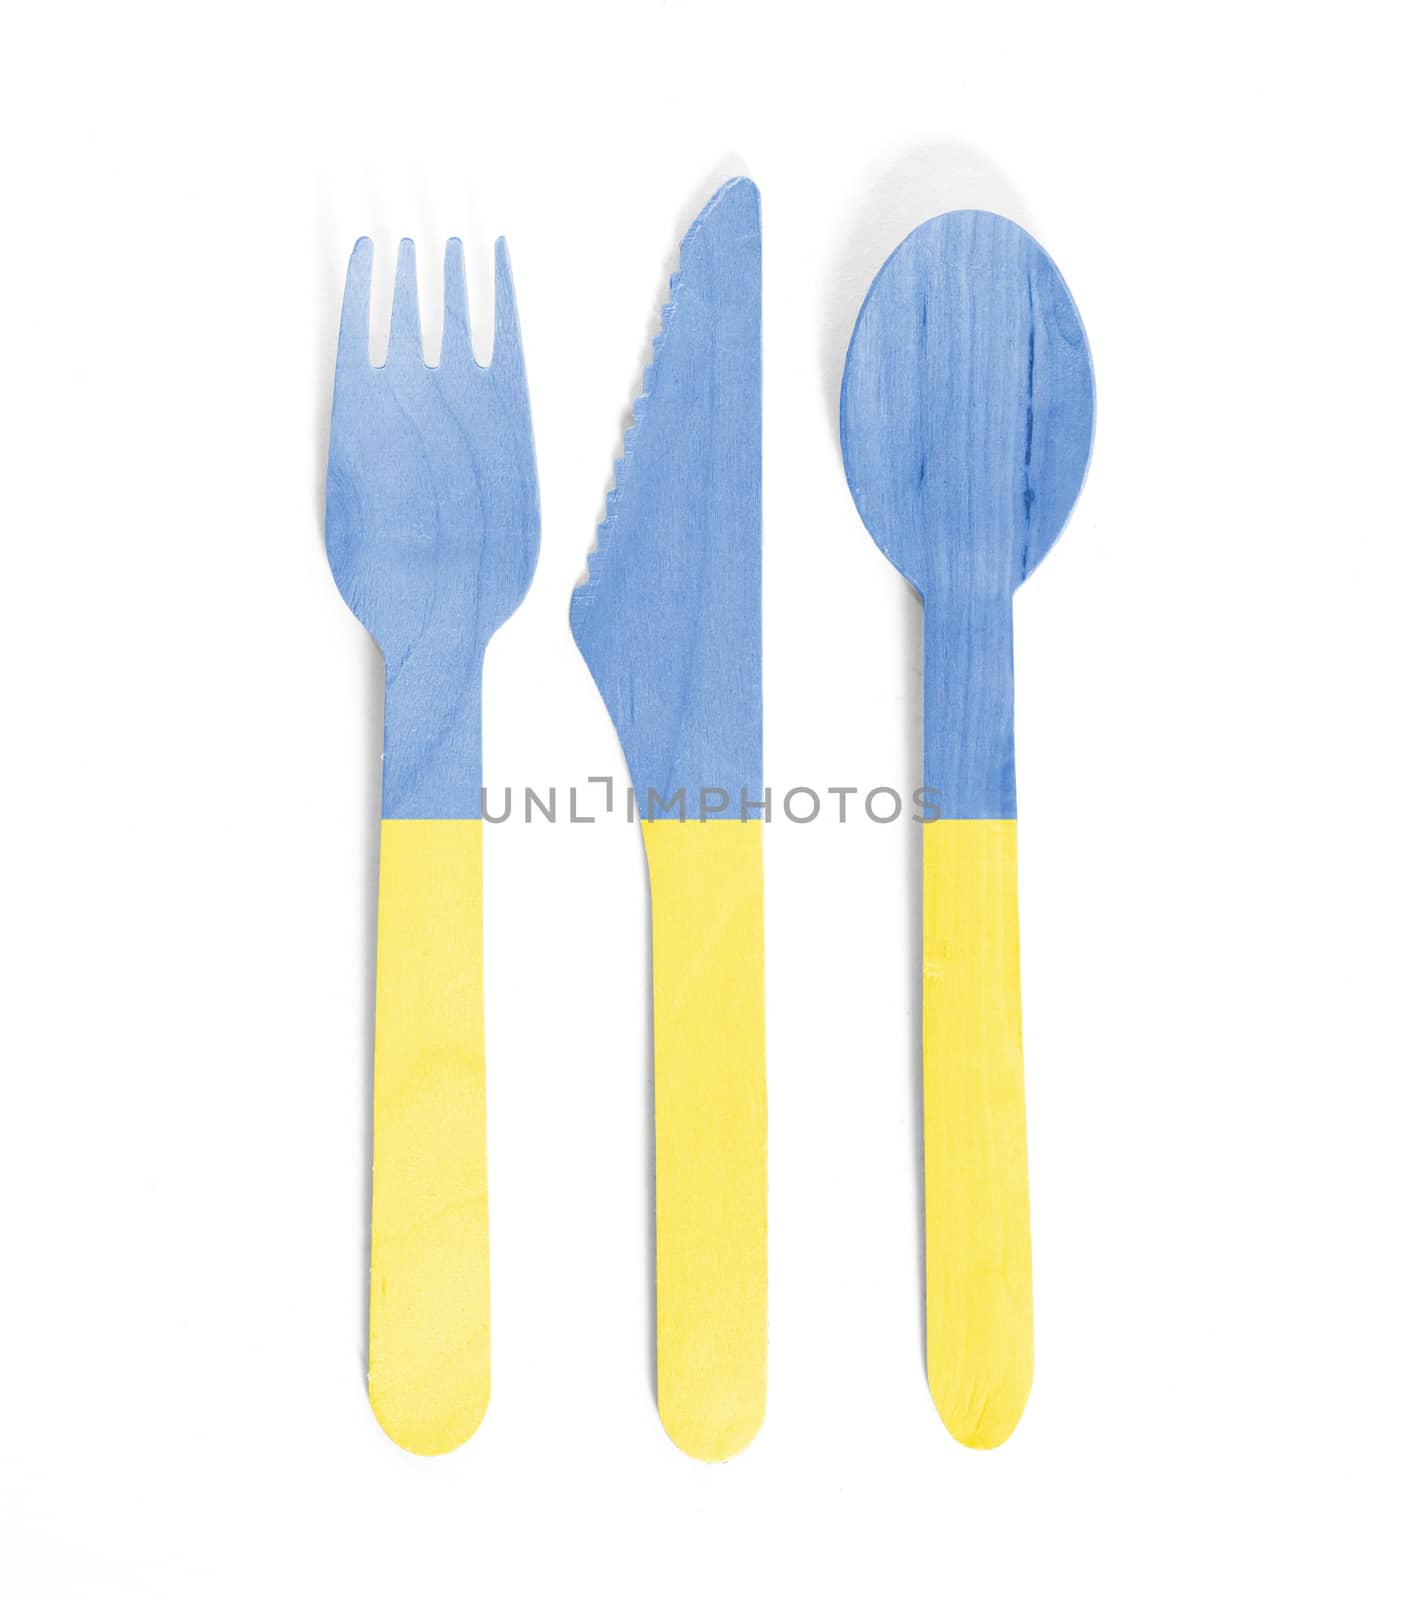 Eco friendly wooden cutlery - Plastic free concept - Isolated - Flag of Ukraine